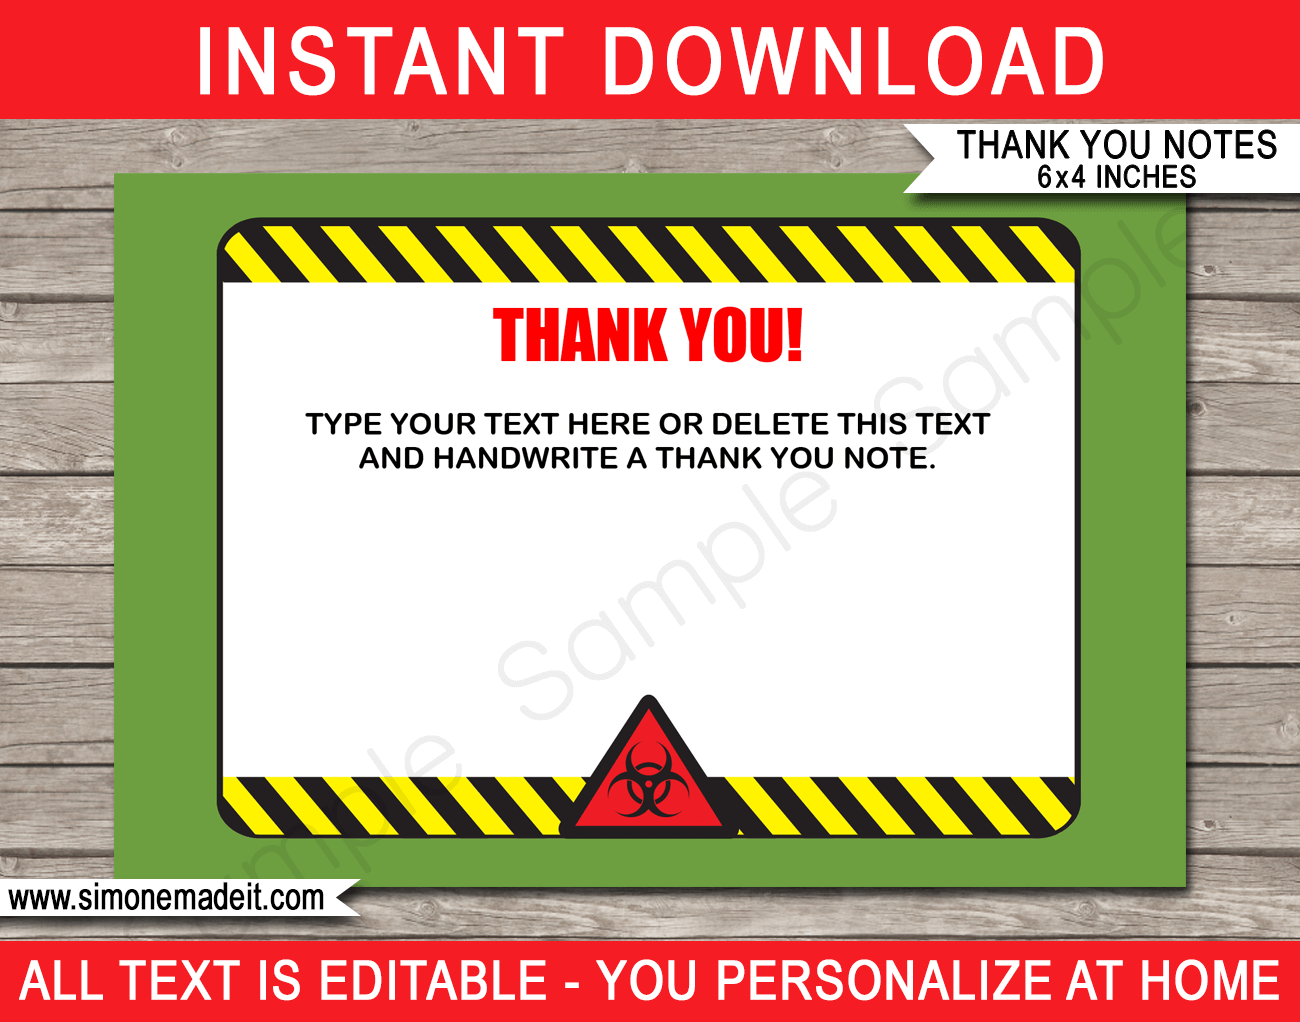 Printable Mad Science Party Thank You Cards Template - Scientist Birthday theme - Virus Quarantine - Editable Text - Instant Download via simonemadeit.com